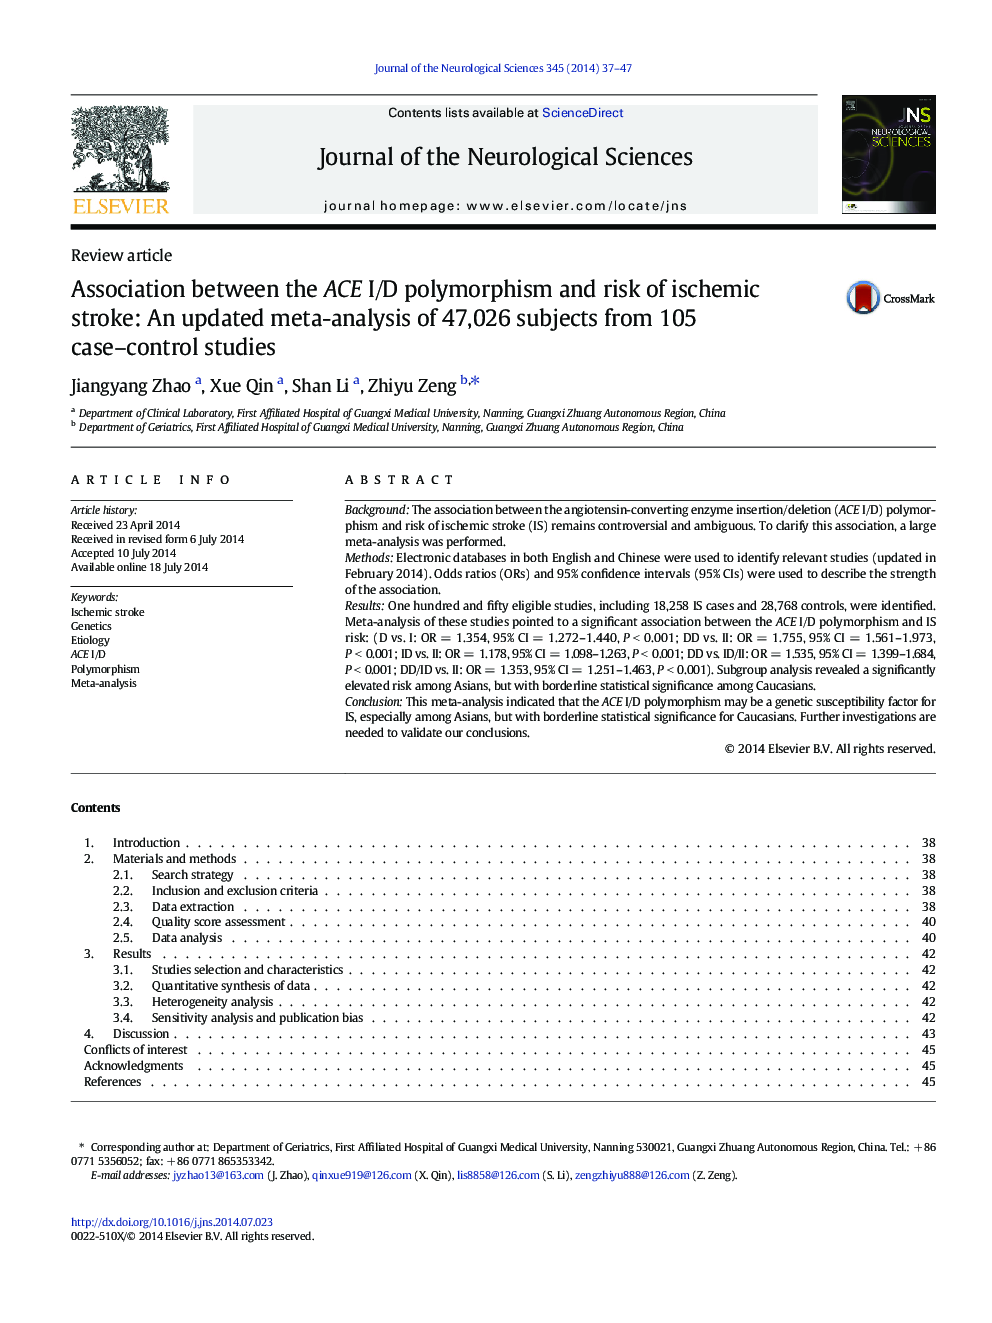 Association between the ACE I/D polymorphism and risk of ischemic stroke: An updated meta-analysis of 47,026 subjects from 105 case–control studies